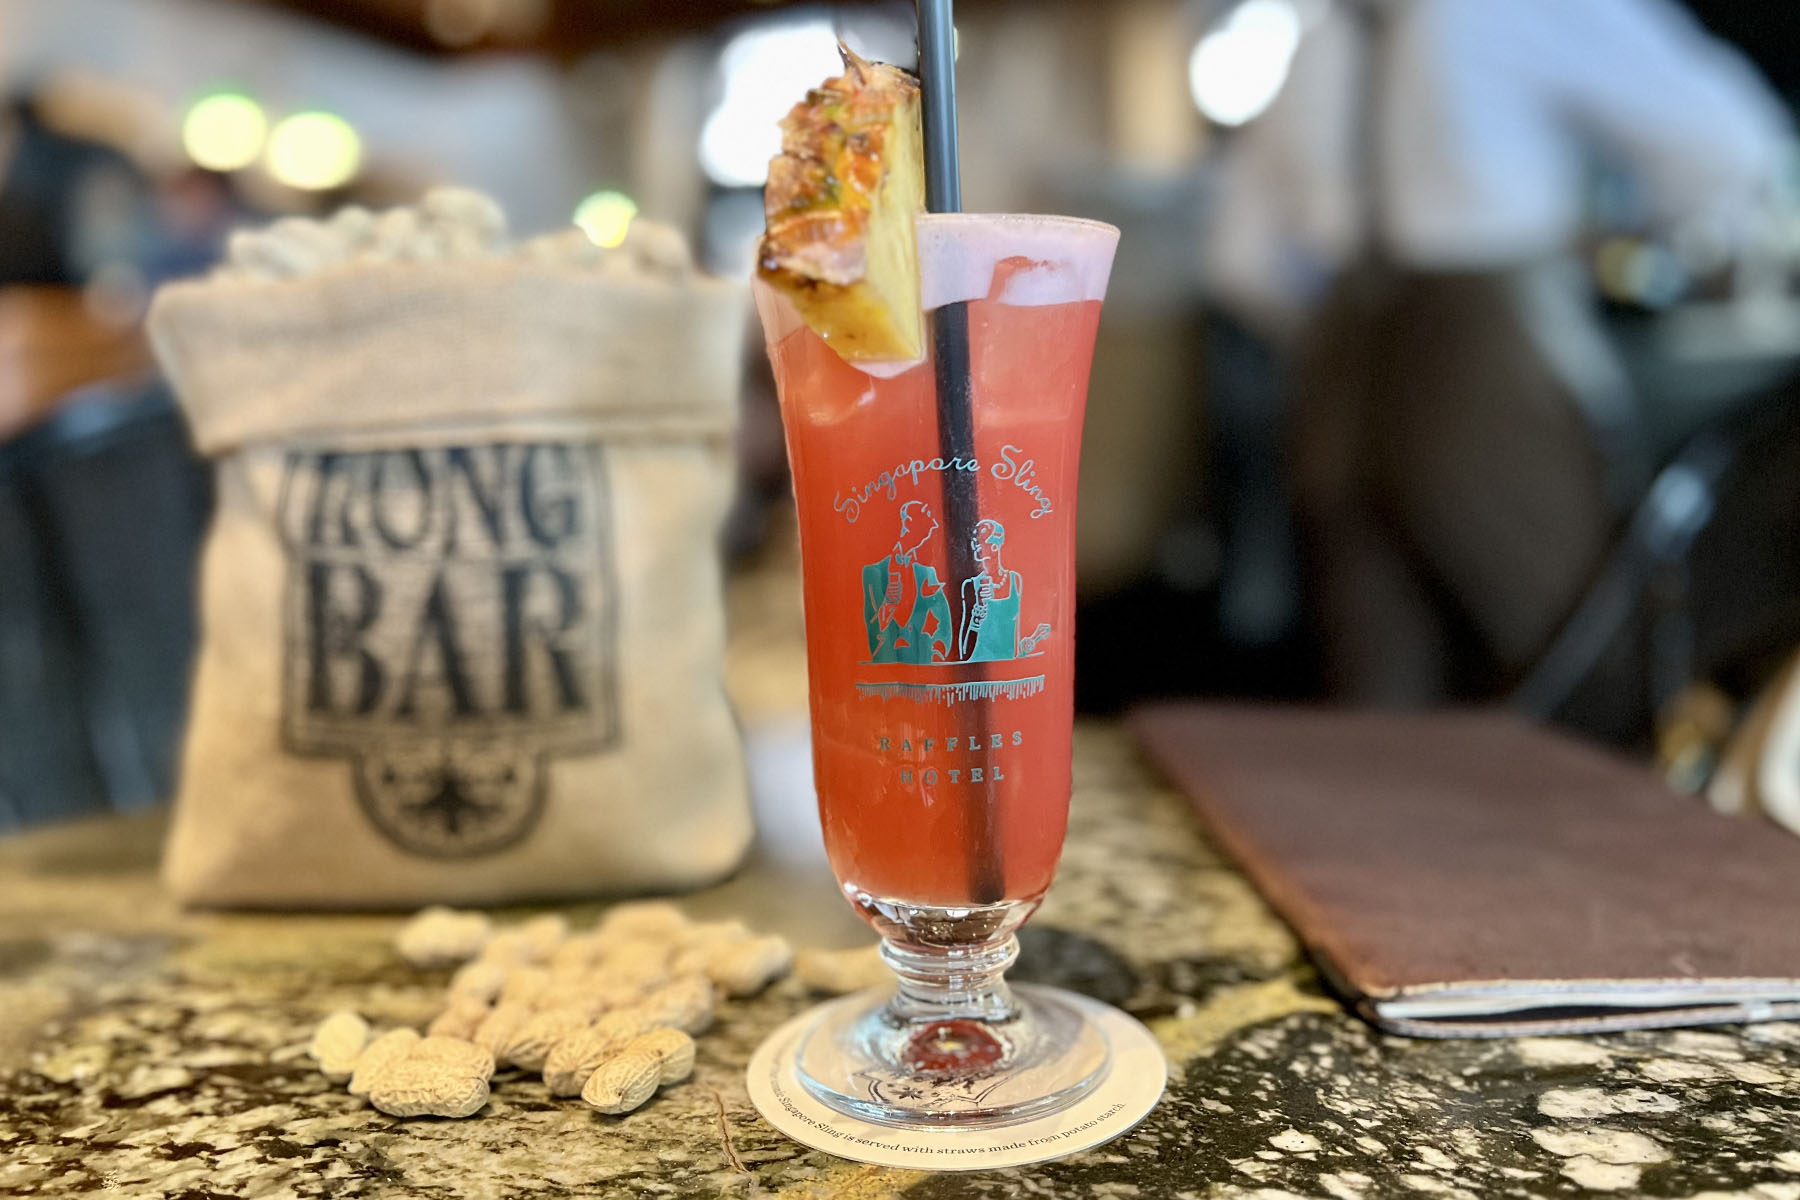 A classic pink Singapore Sling on a bar, served with peanuts, as is tradition.